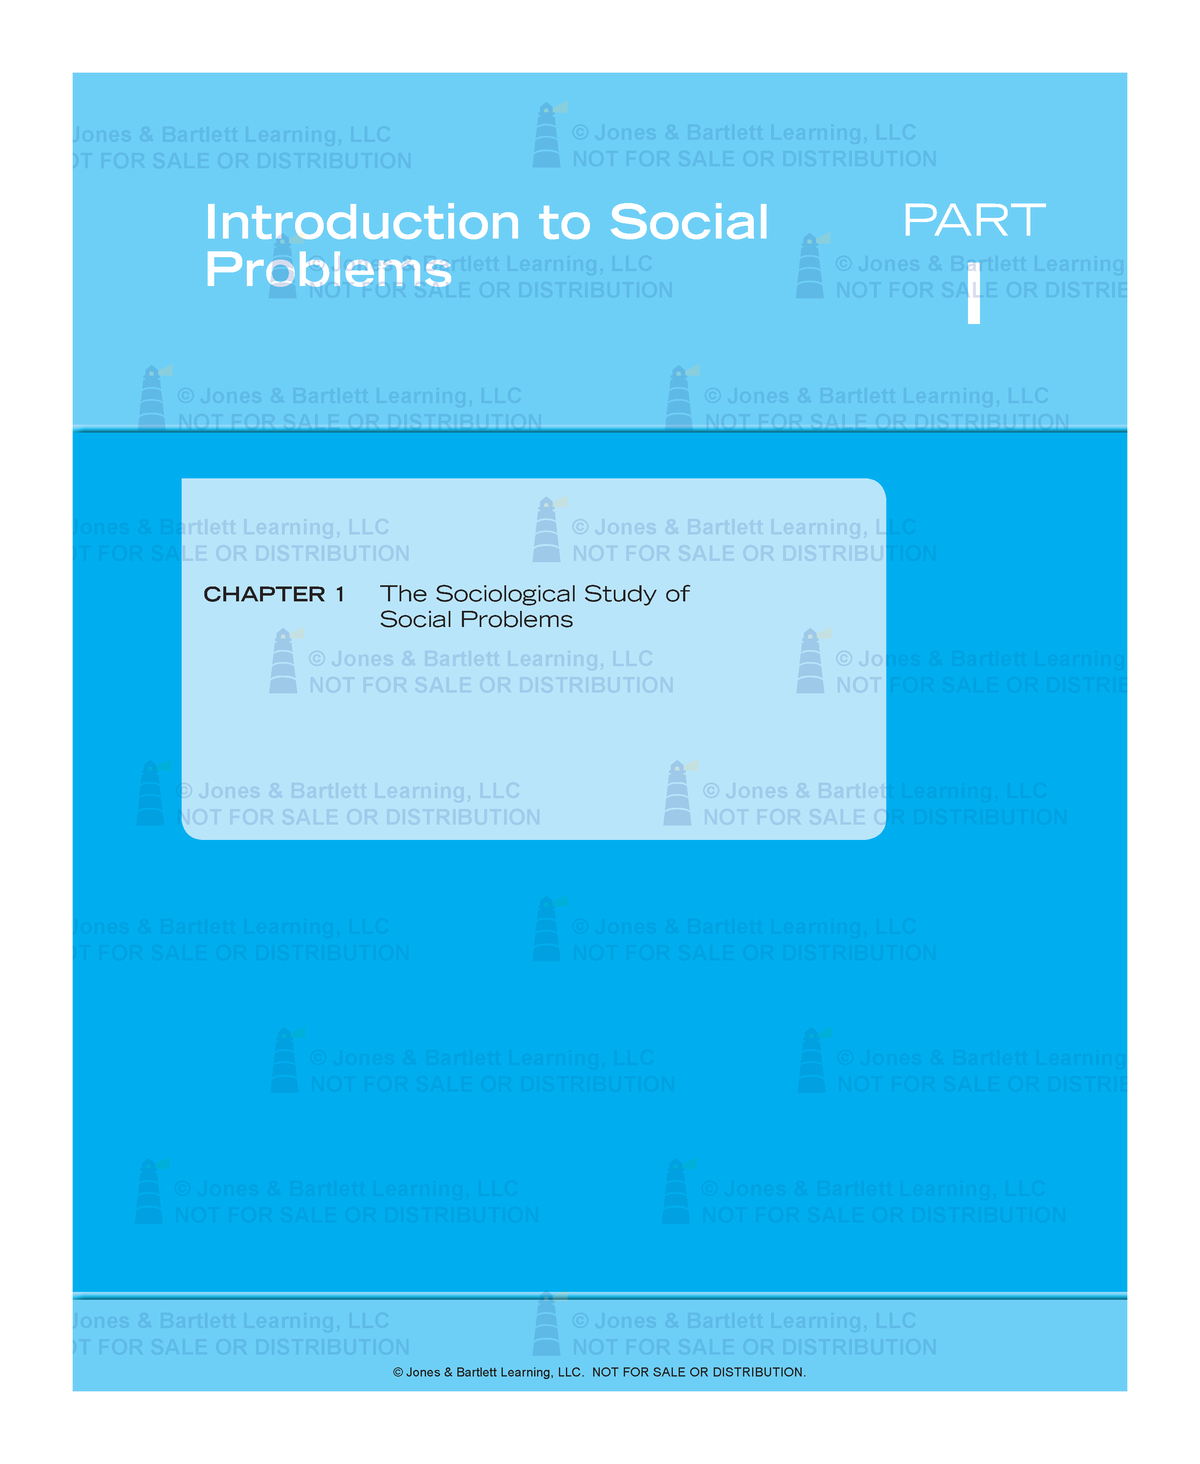 Definition+of+social+problems+and+theories Introduction to Social